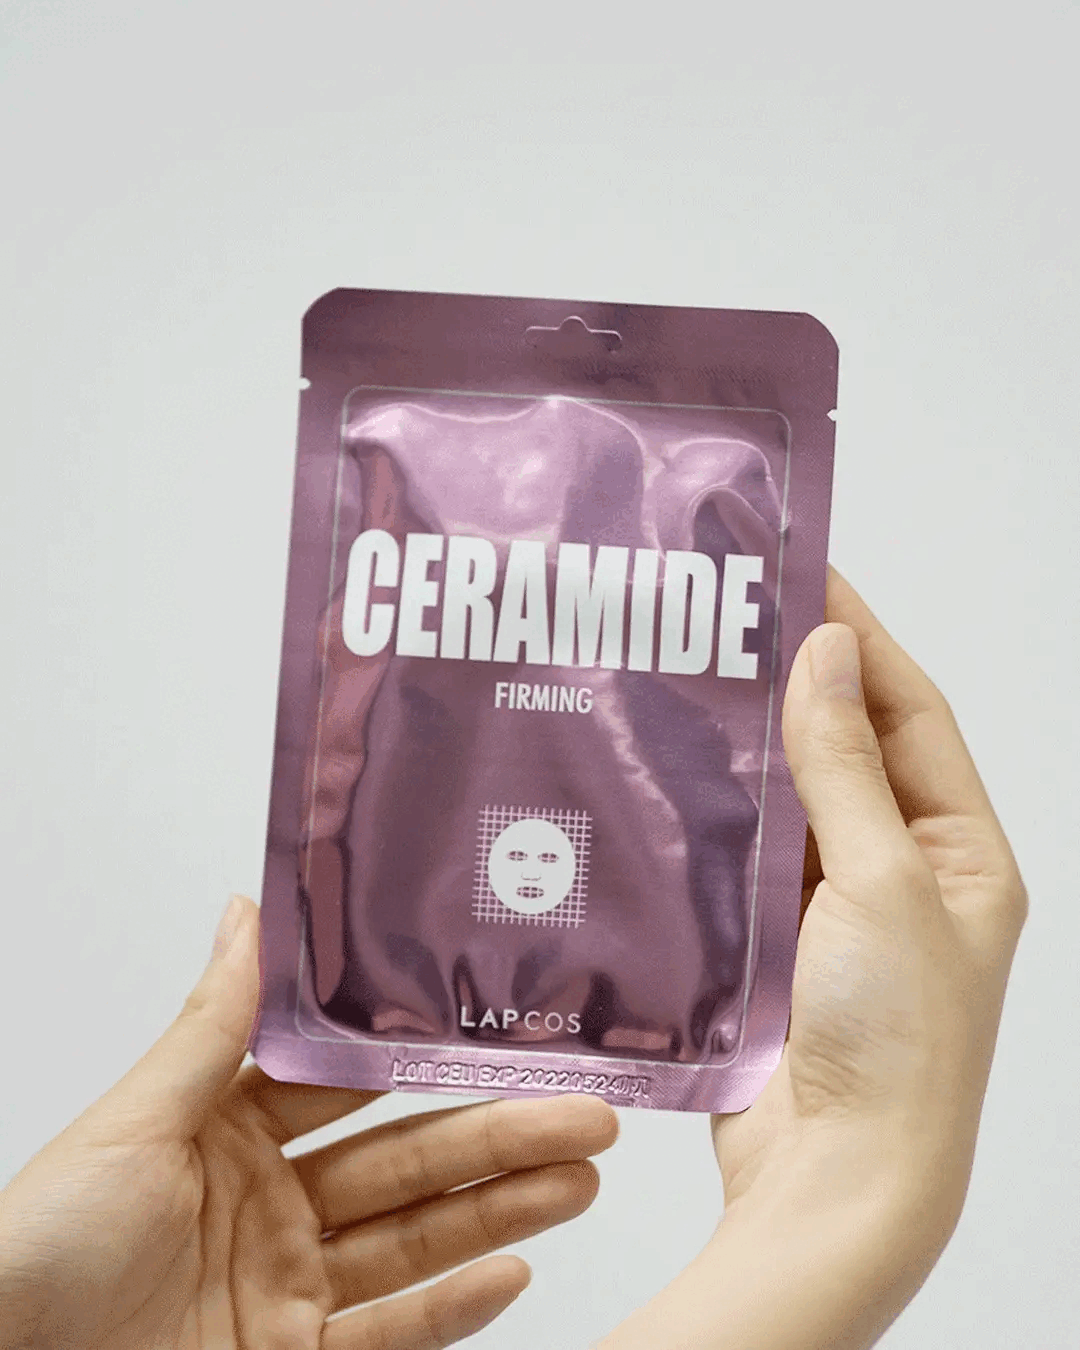 Model removes Ceramide Firming sheet mask from packet and unfolds it